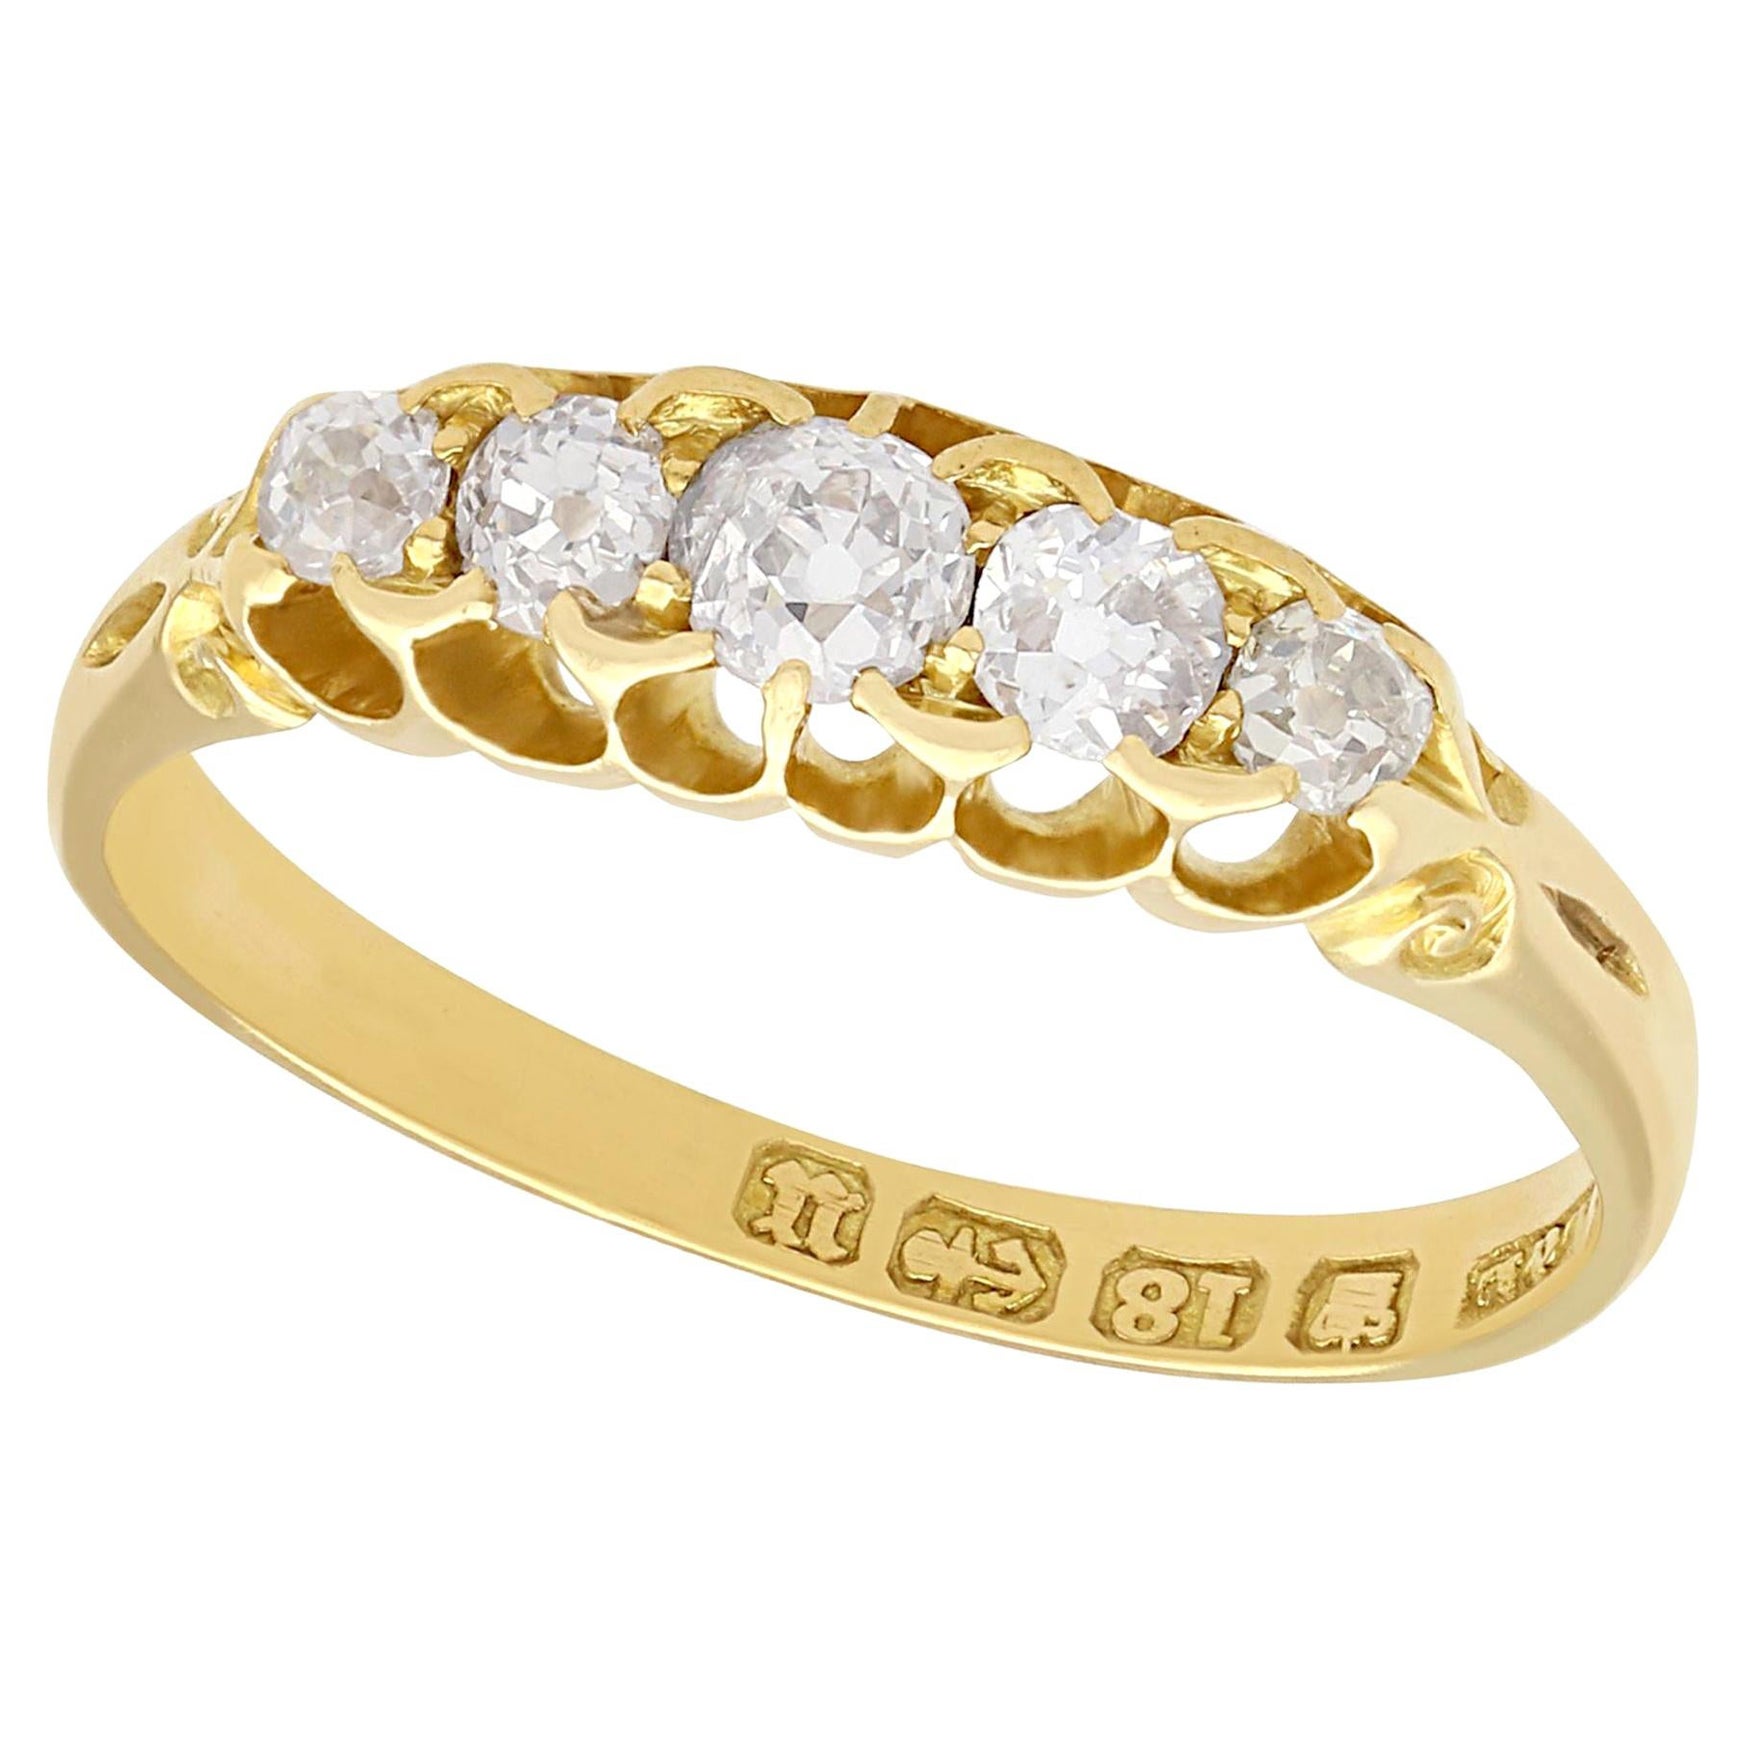 Antique Victorian 0.66 Ct Diamond and 18K Yellow Gold Five-Stone Ring